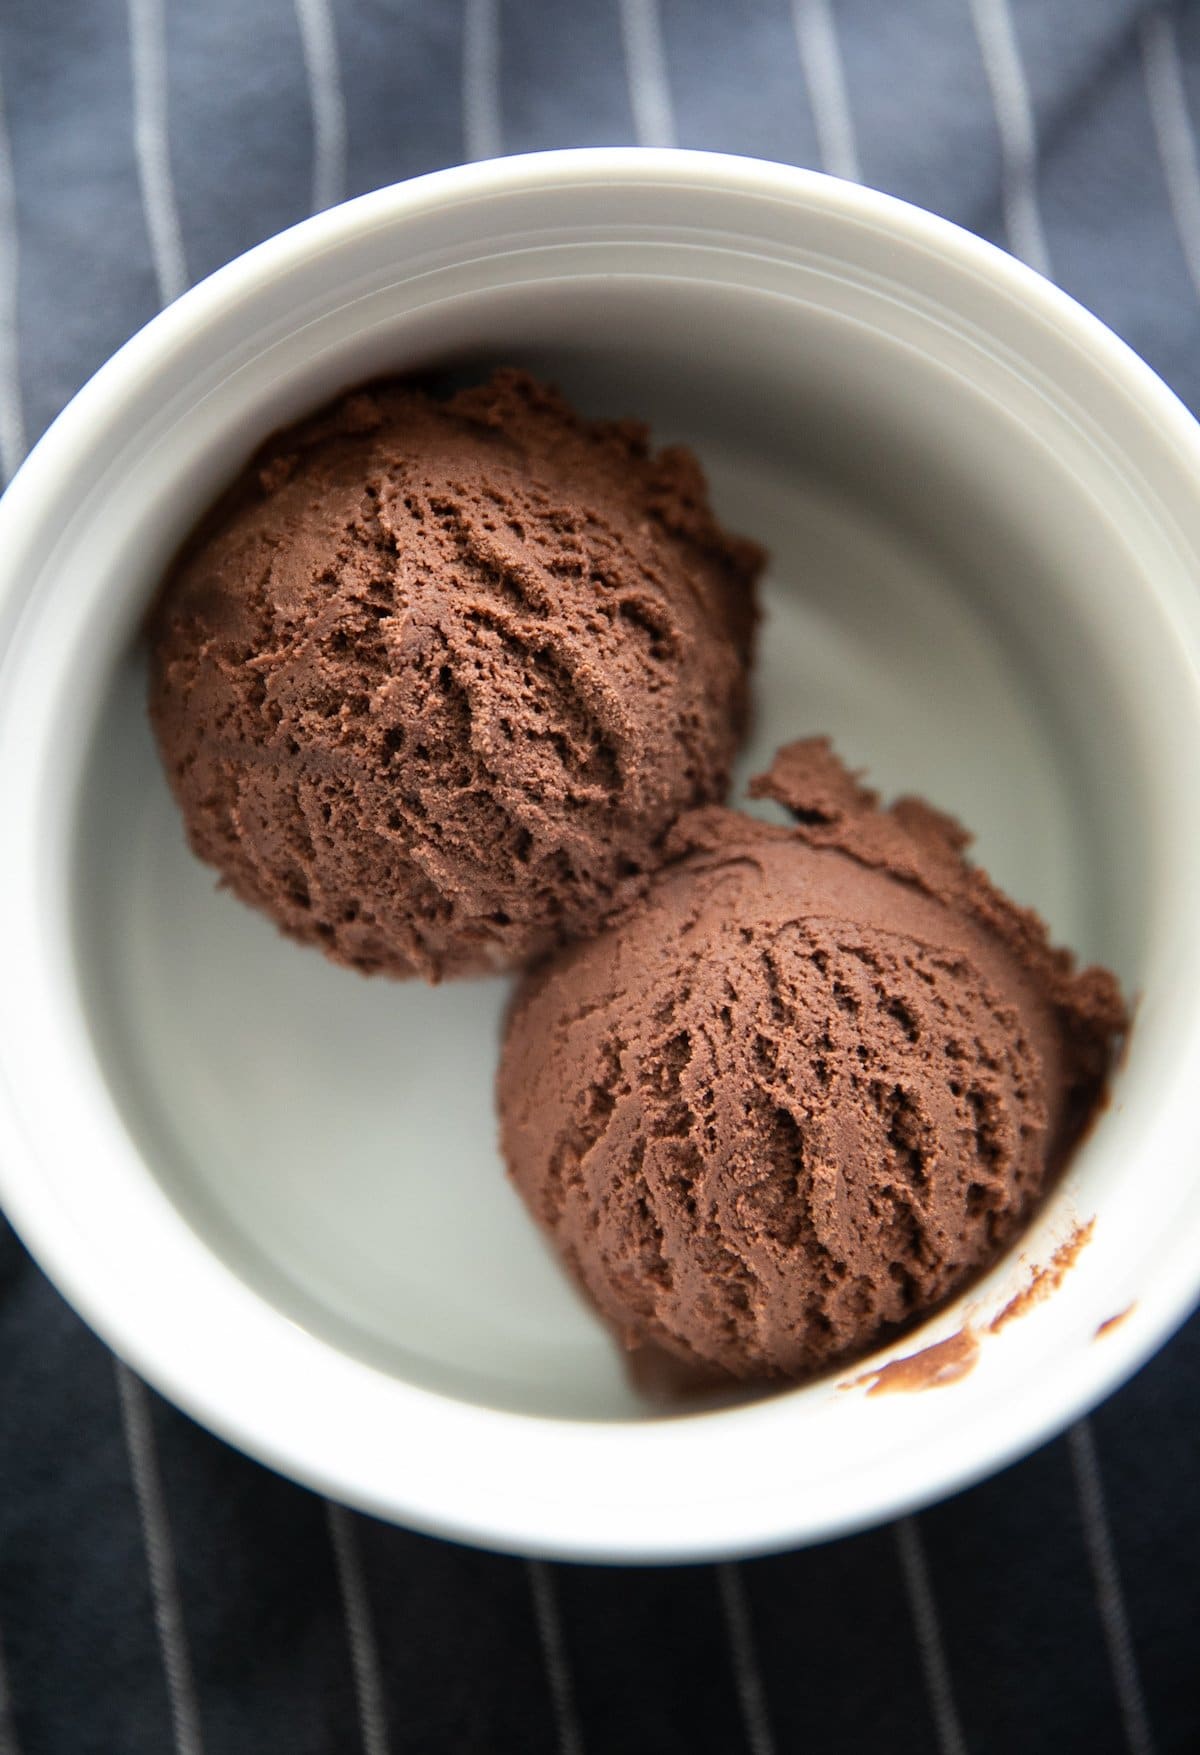 two chocolate ice cream scoops in a white bowl